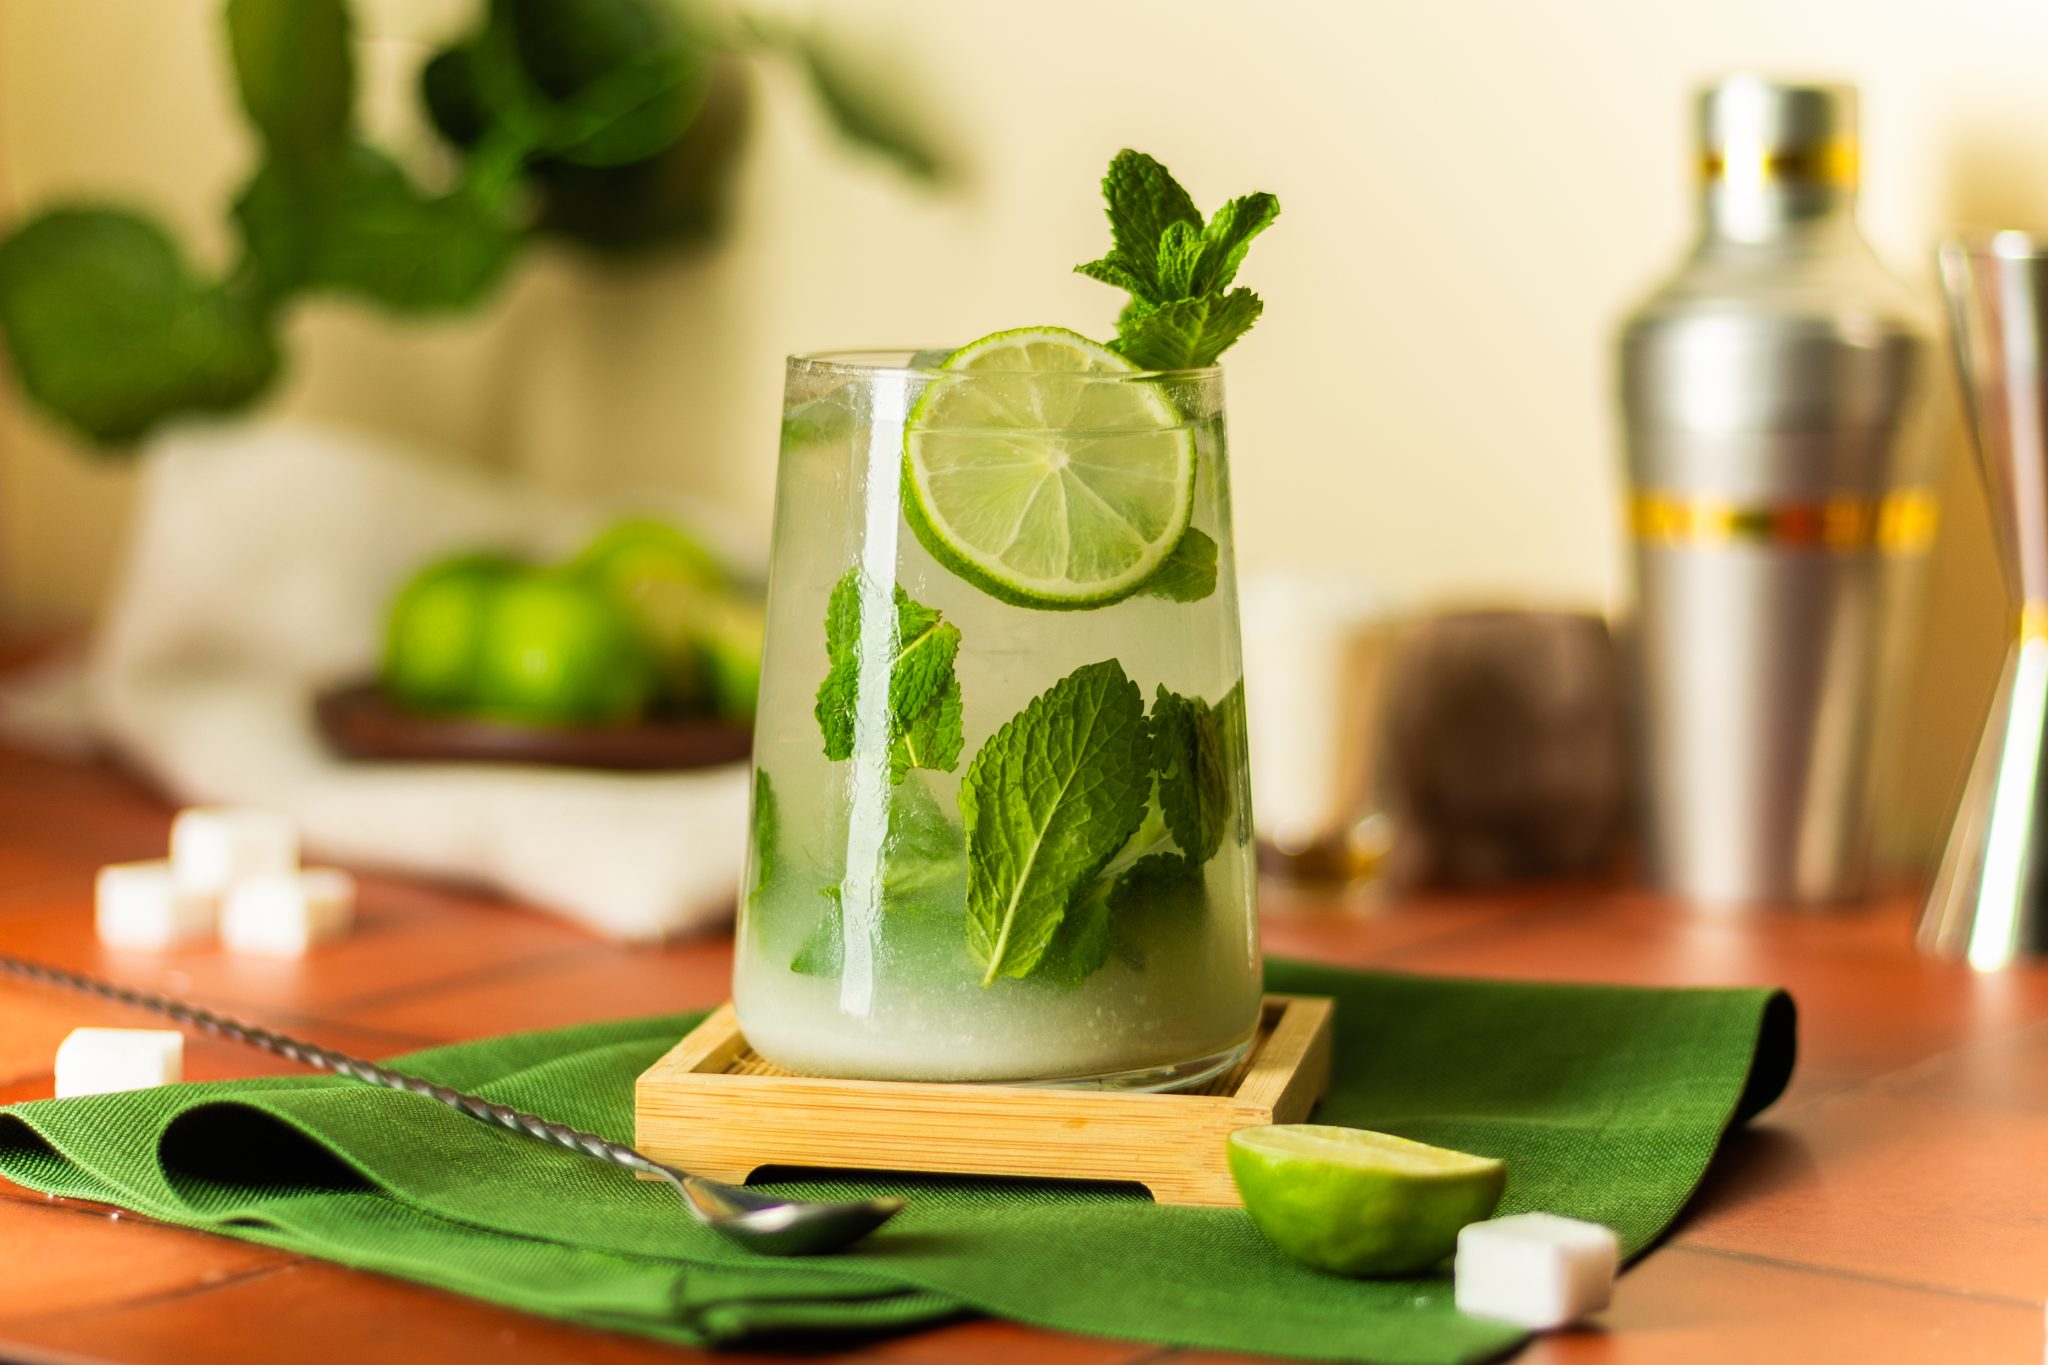 A side shot of a Coconut Mojito cocktail in a highball glass on a coaster placed on a green cloth on a tiled surface surrounded by sugar cubes, a bar spoon, limes, a shaker, and a white cloth, in front of a light yellow wall.